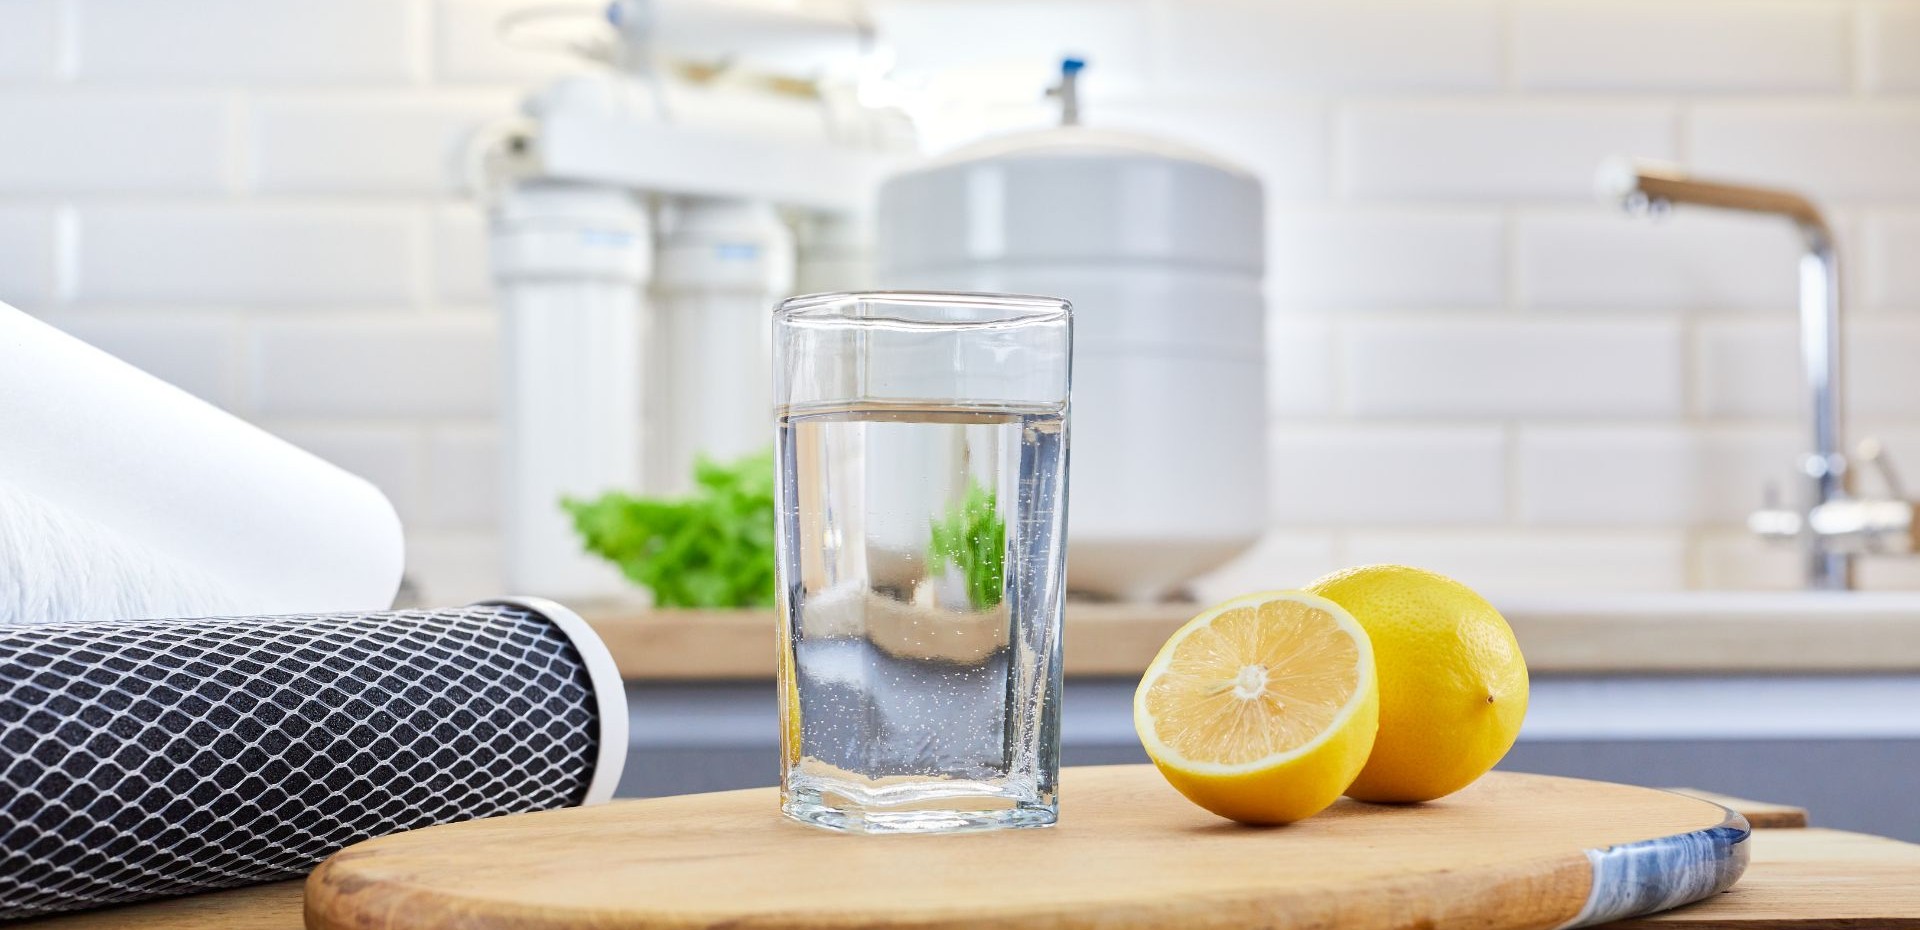 The benefits of the water filter in my place